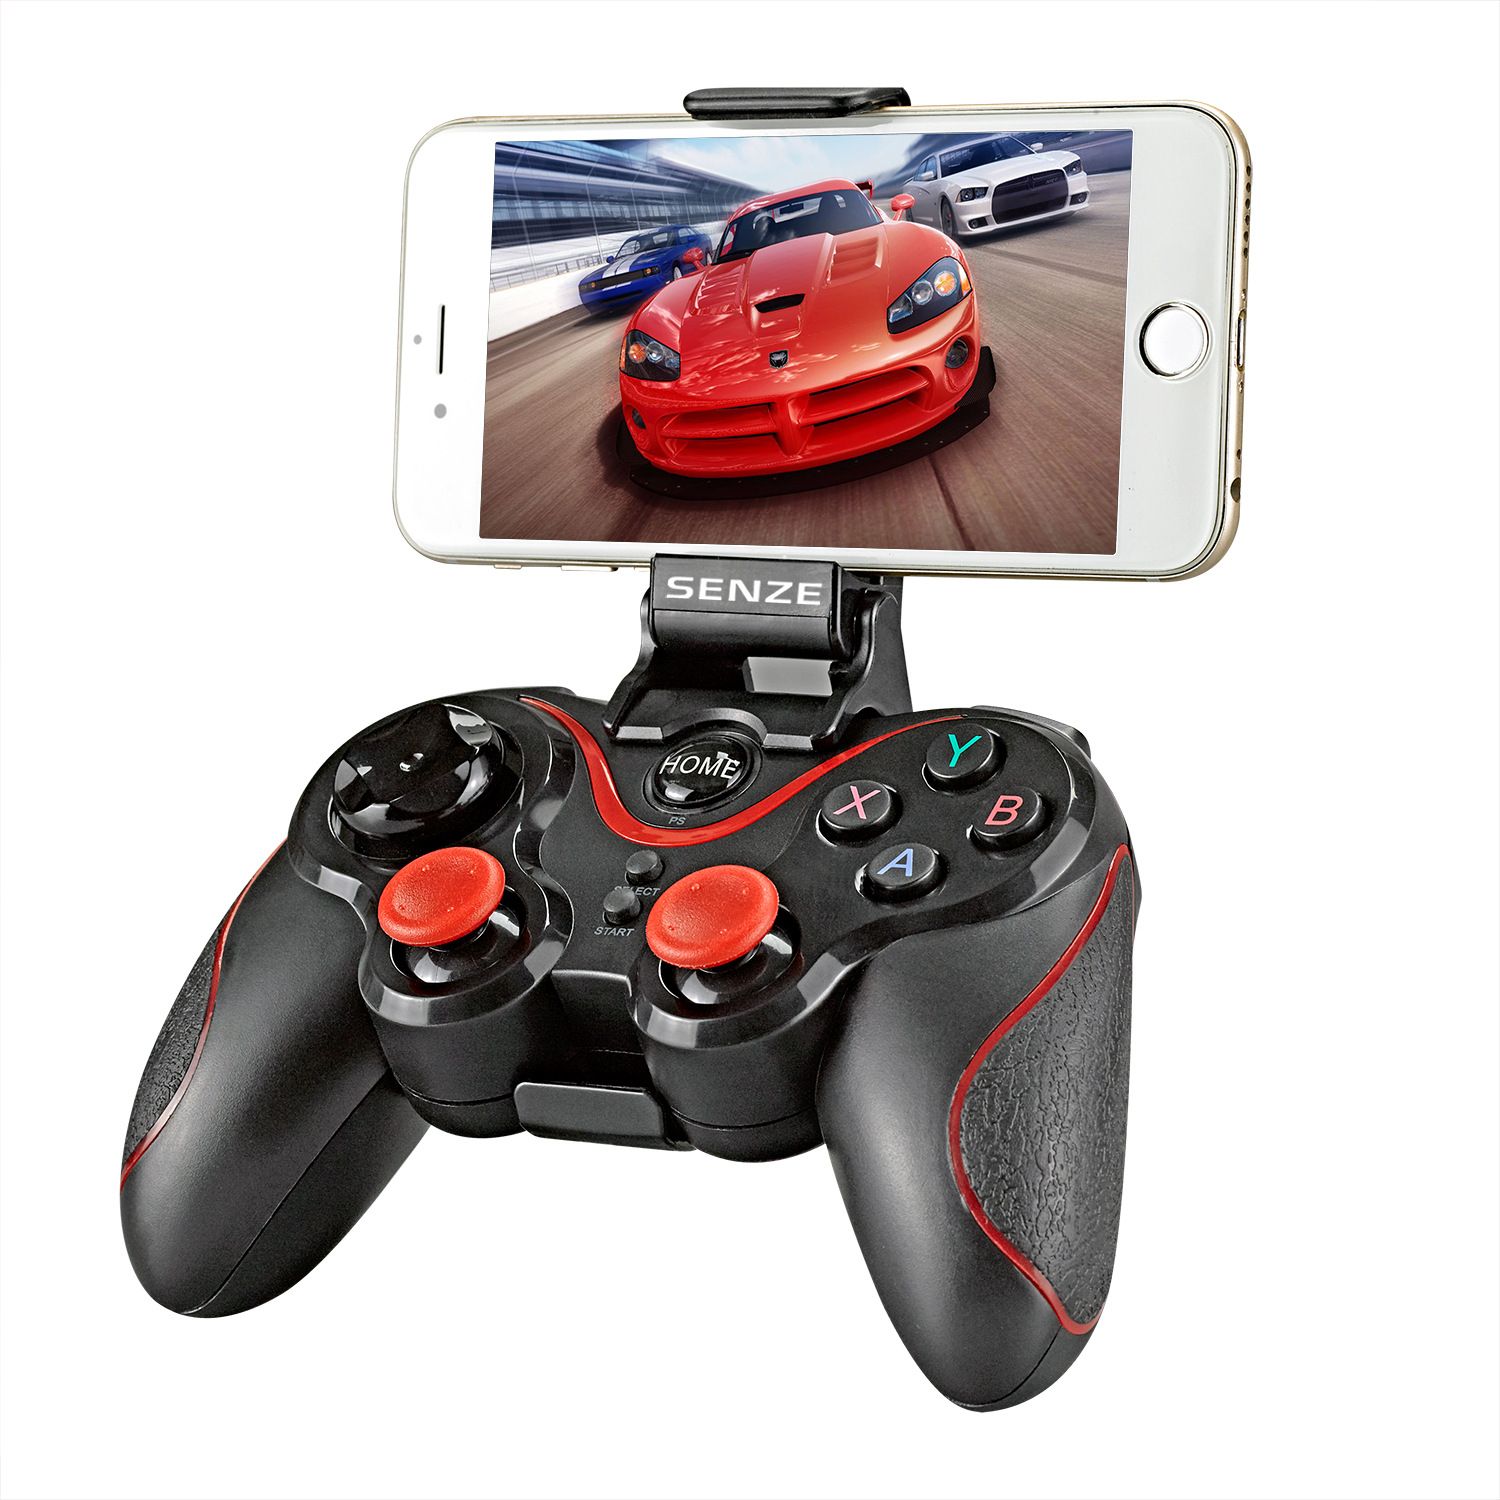 Senze-SZ-A1006-bluetooth-Gamepad-Game-Controller-for-iOS-Android-Mobile-Phone-Tablet-TV-Box-Smart-TV-1623866